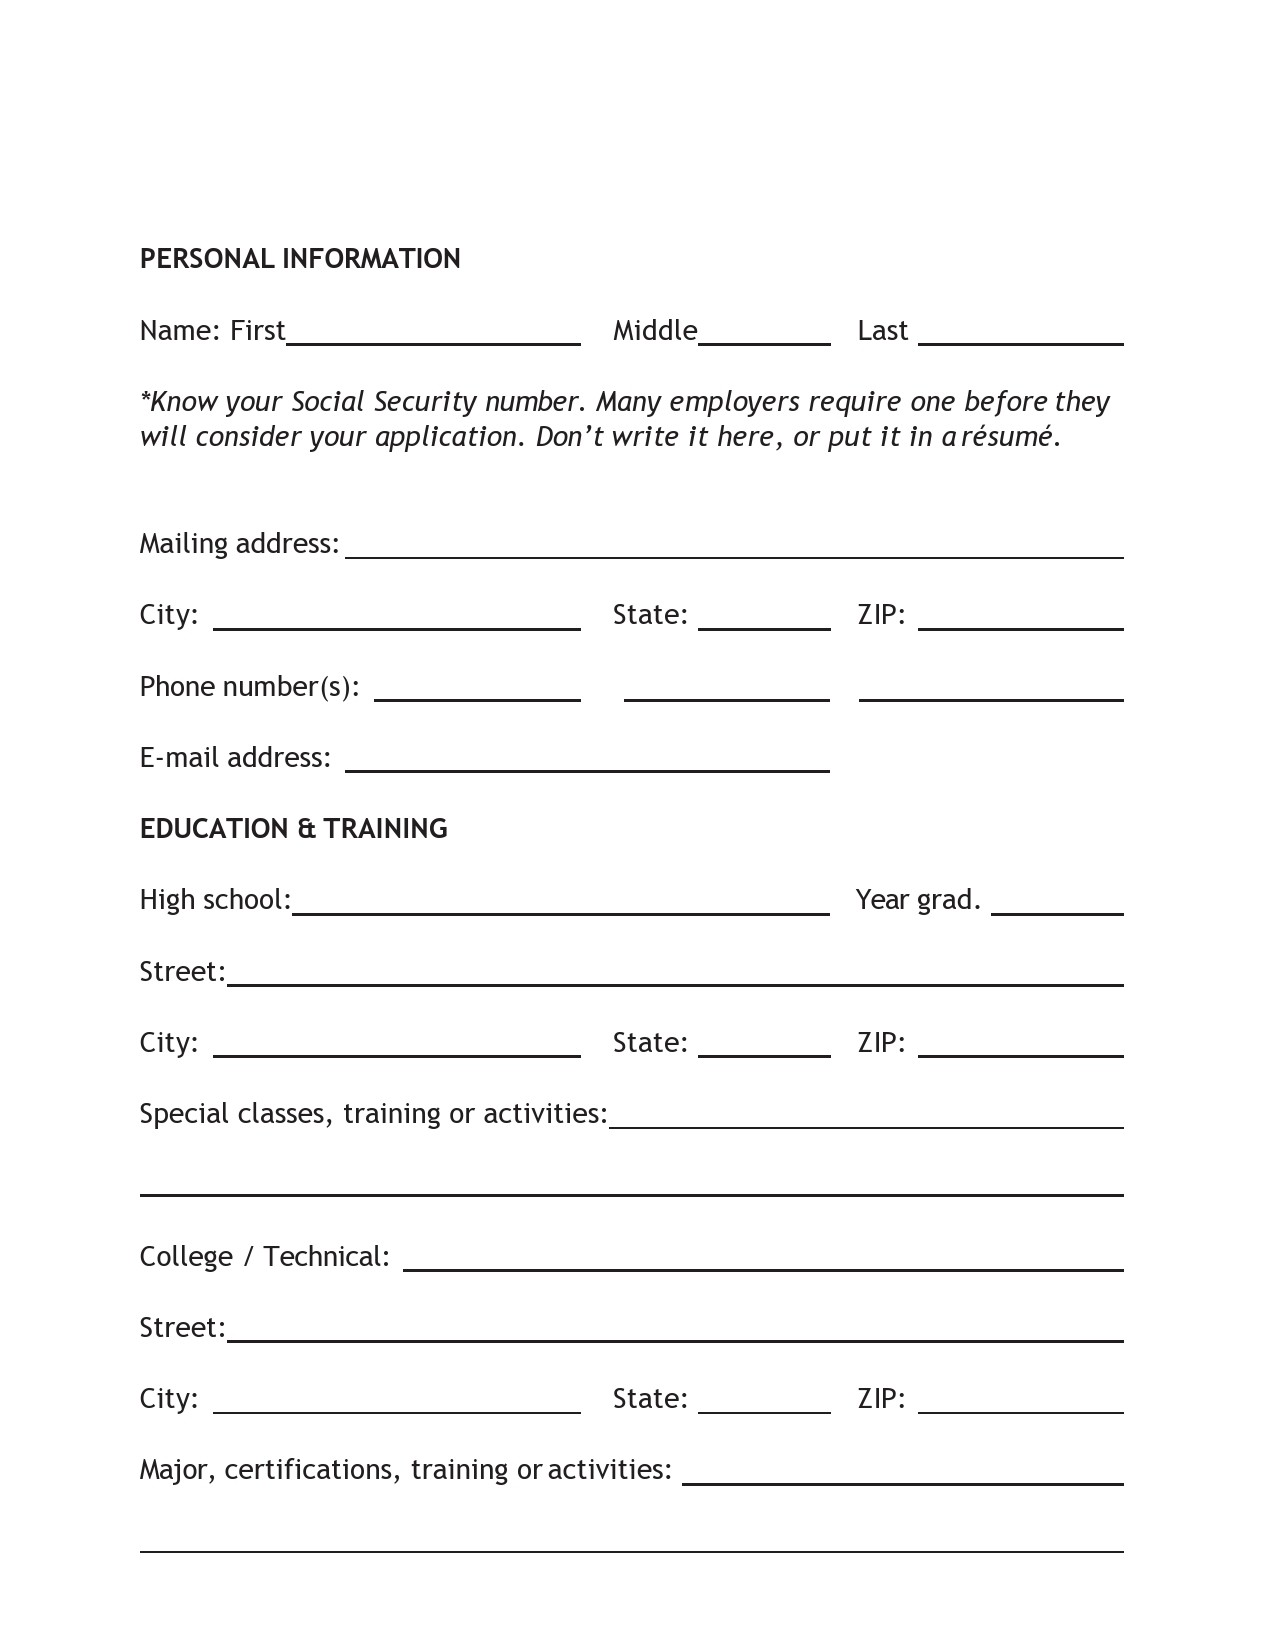 Free personal information form 18